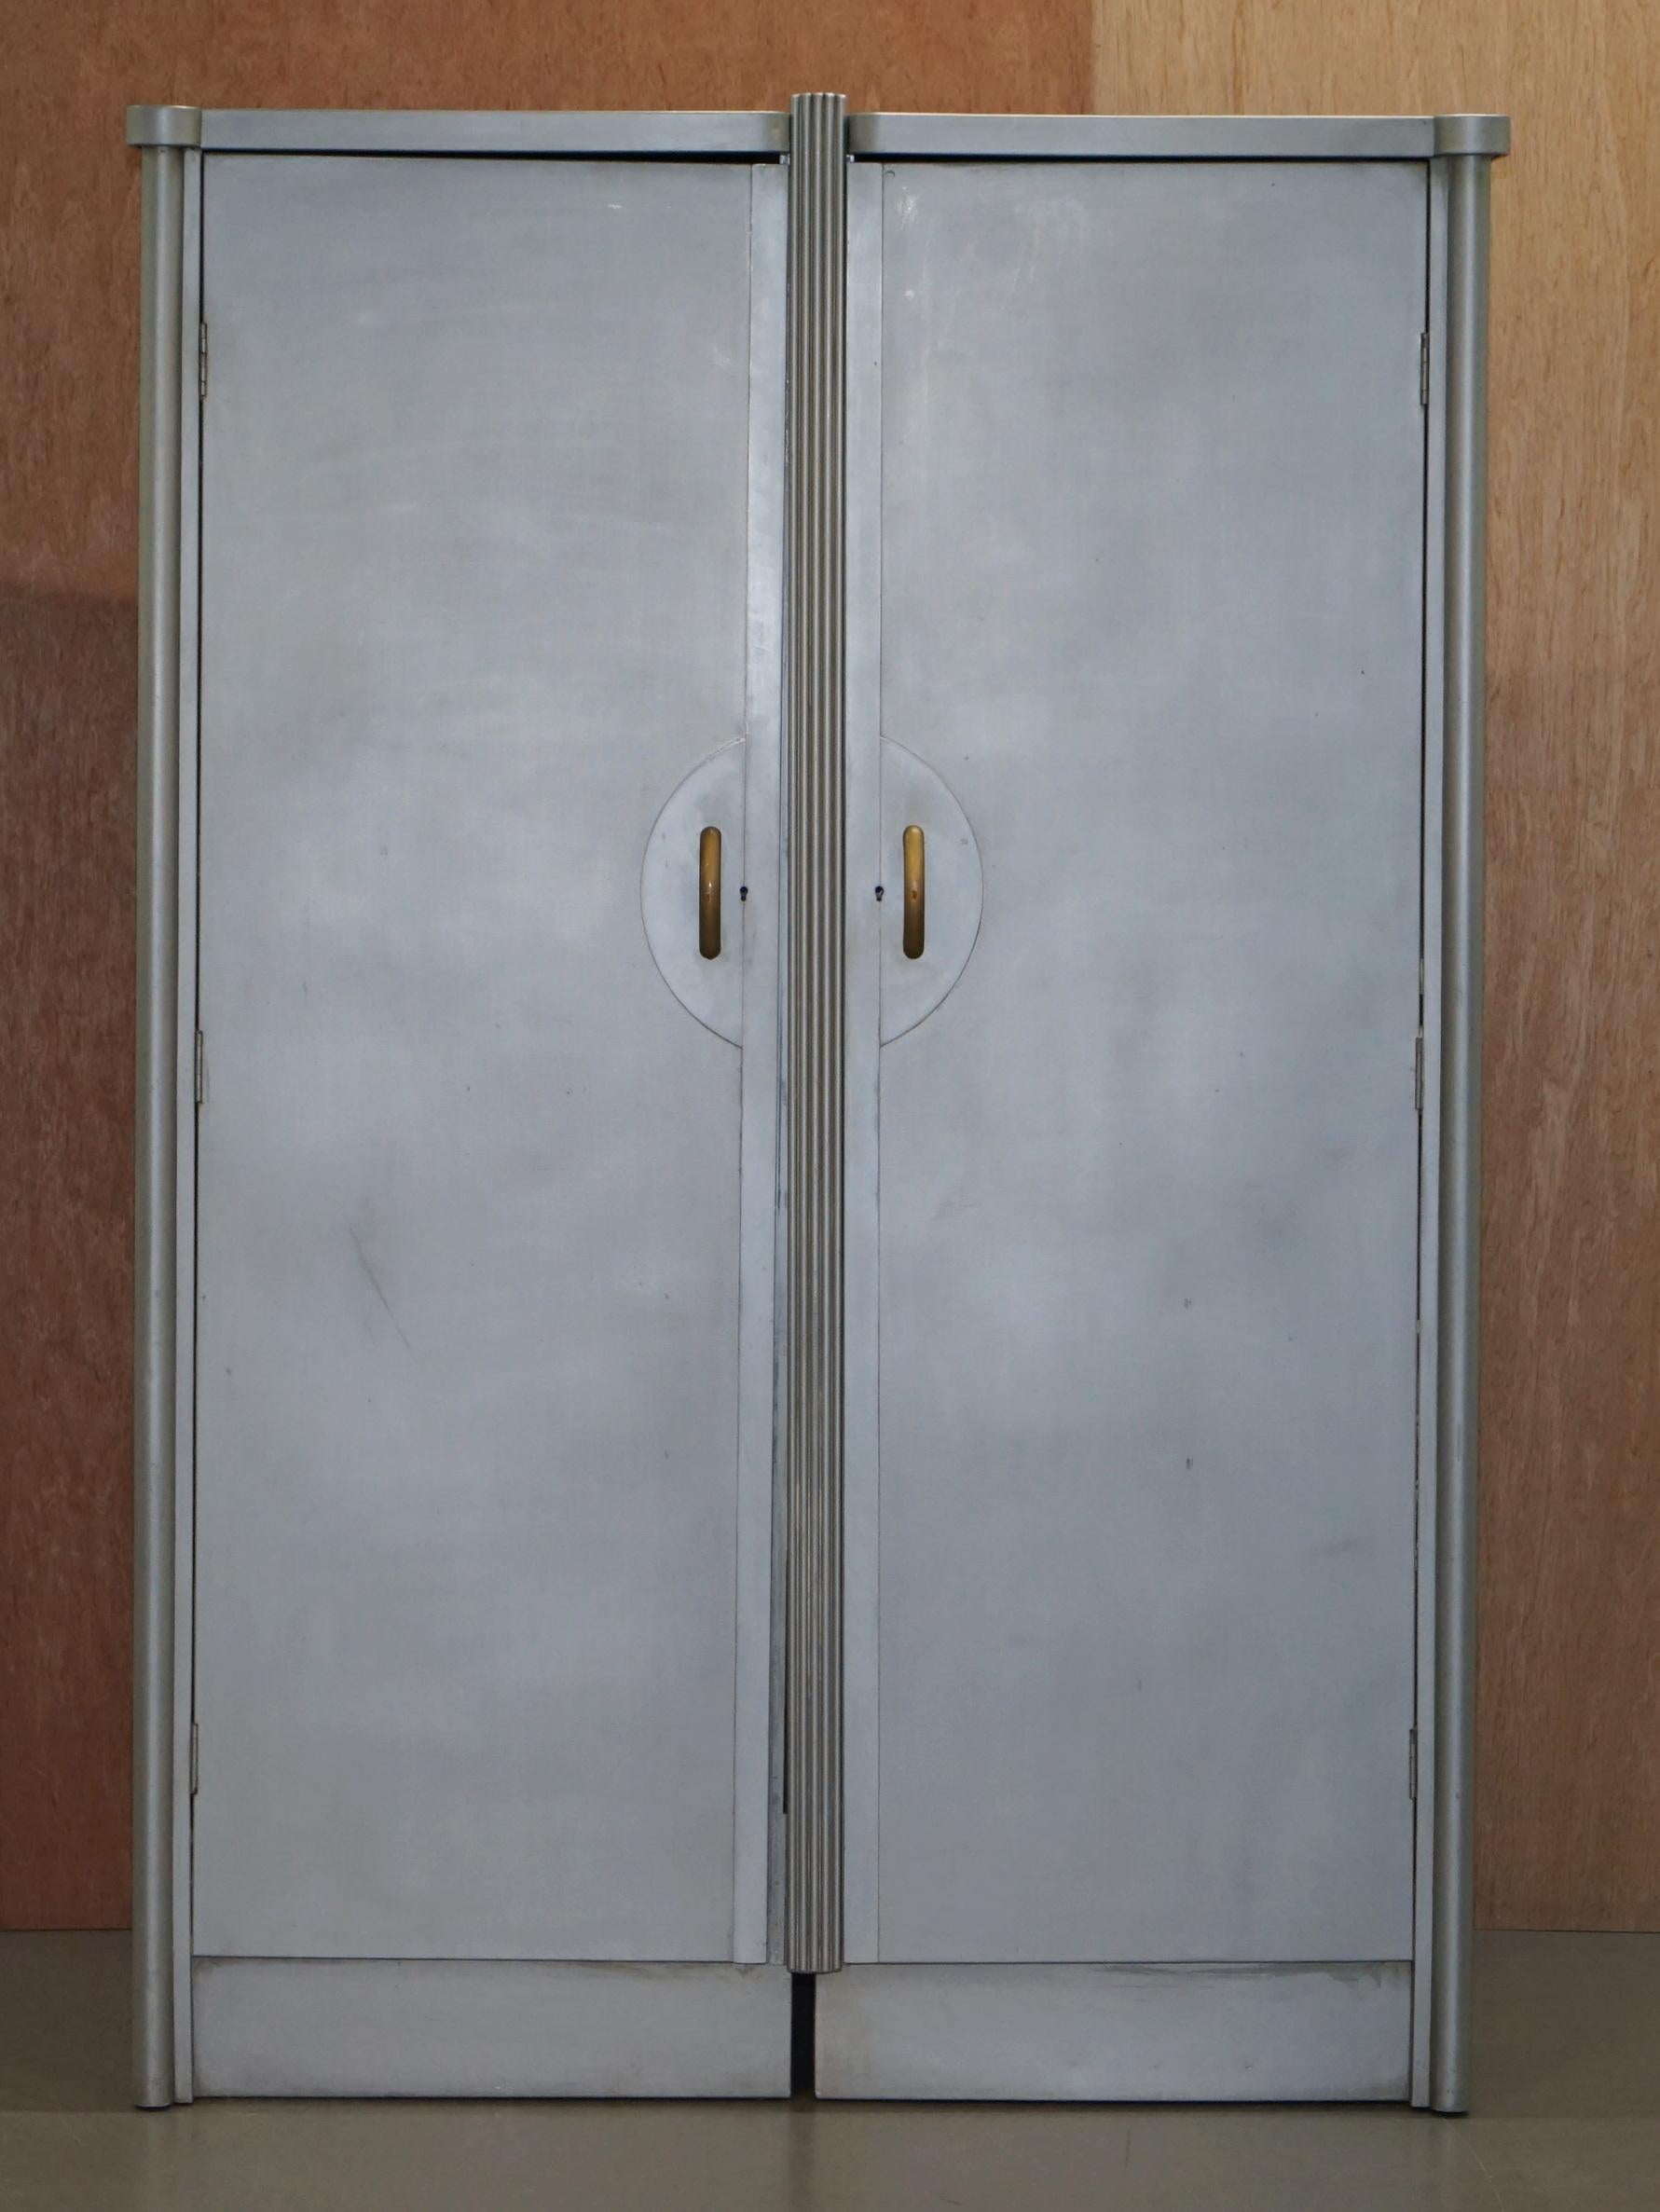 We are delighted to offer for sale this stunning original Huntington Aviation Art Deco aluminium wardrobe

This piece is part of a suite, I have in total a bedside table, a tall boy cupboard, the head and foot bed boards, a large double wardrobe